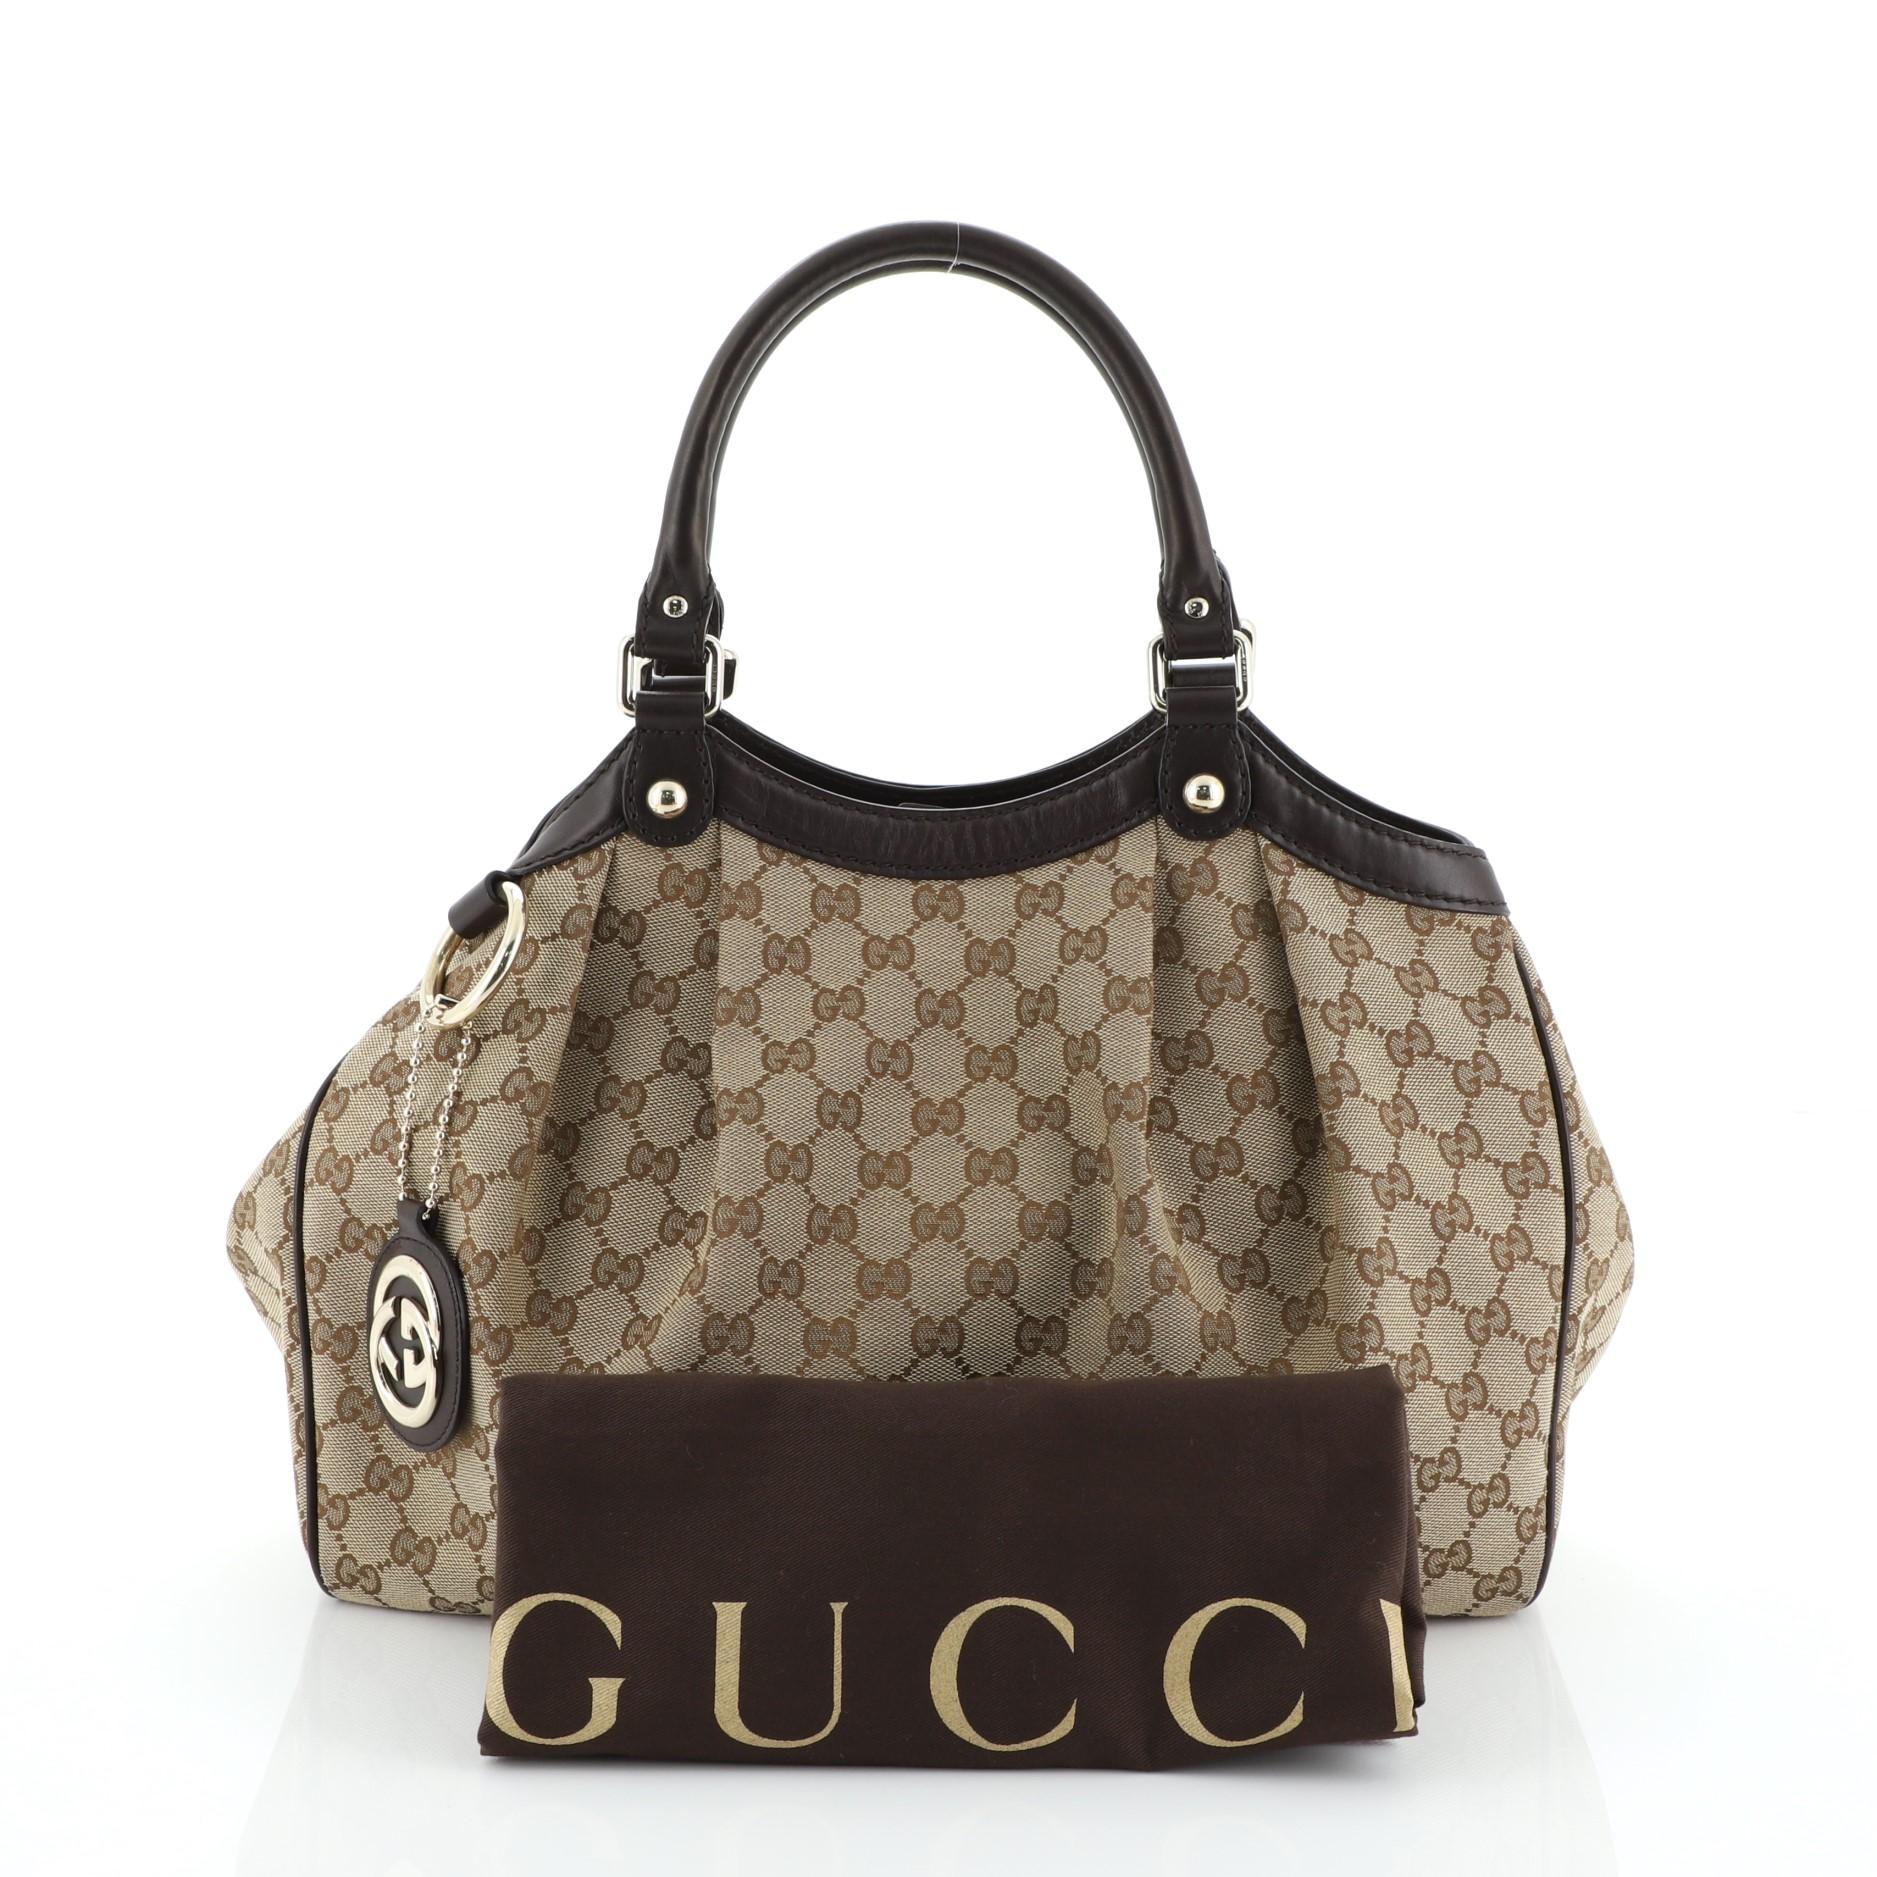 This Gucci Sukey Tote GG Canvas Medium, crafted from brown GG monogram canvas, features dual rolled leather handles, leather trim, and gold-tone hardware. Its magnetic snap closure opens to a brown fabric interior with side zip pocket. 

Estimated